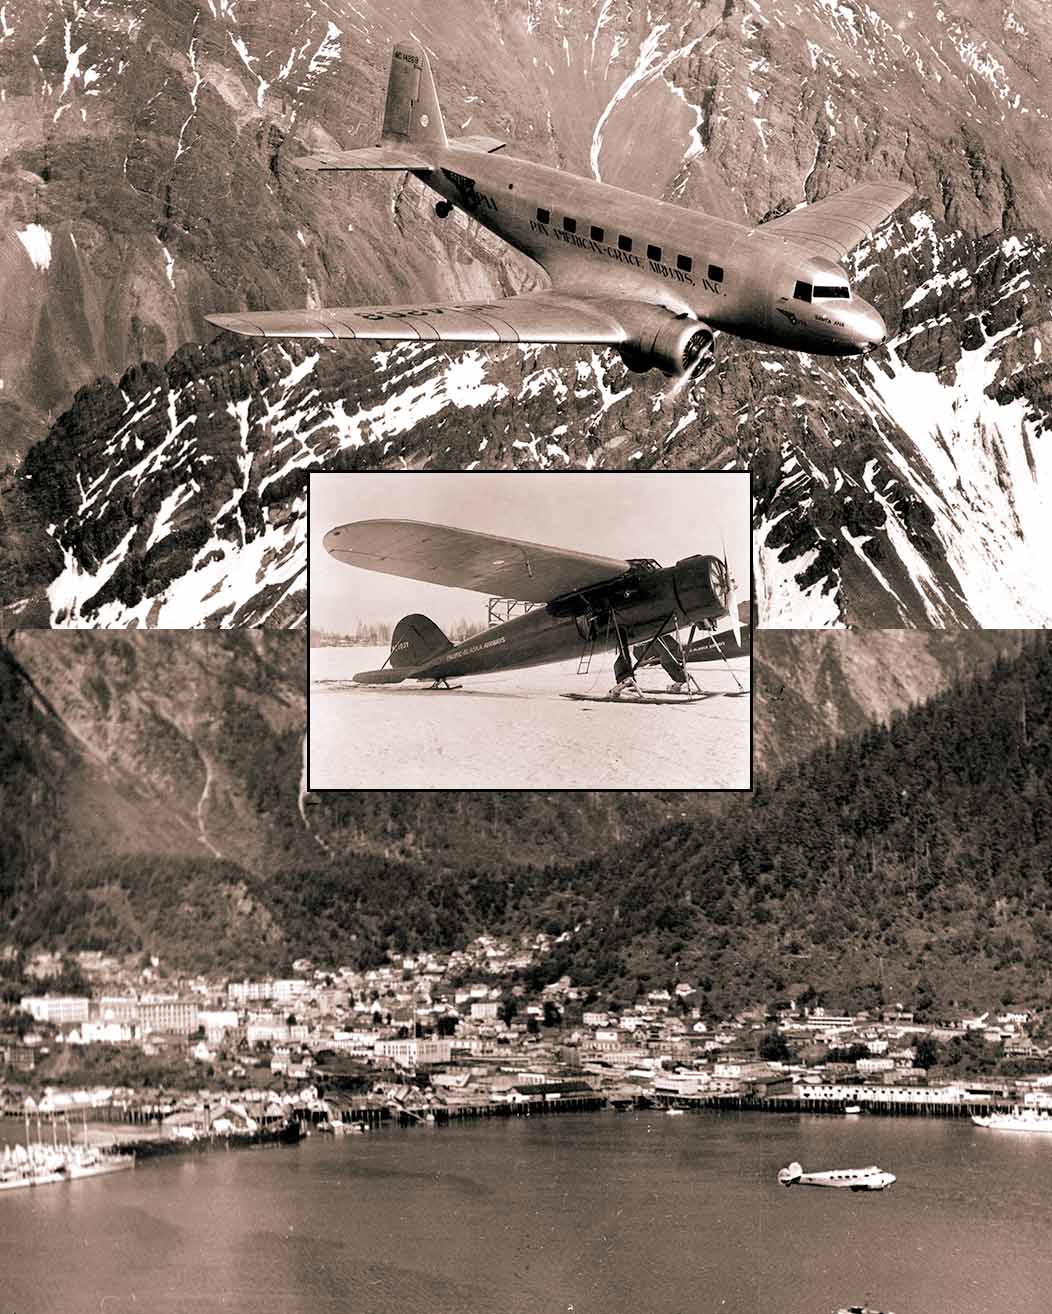 Panagra DC-2 in the Andes, Consolidated Fleetster with skis, Pacific Alaska L-10 Electra over Juneau.